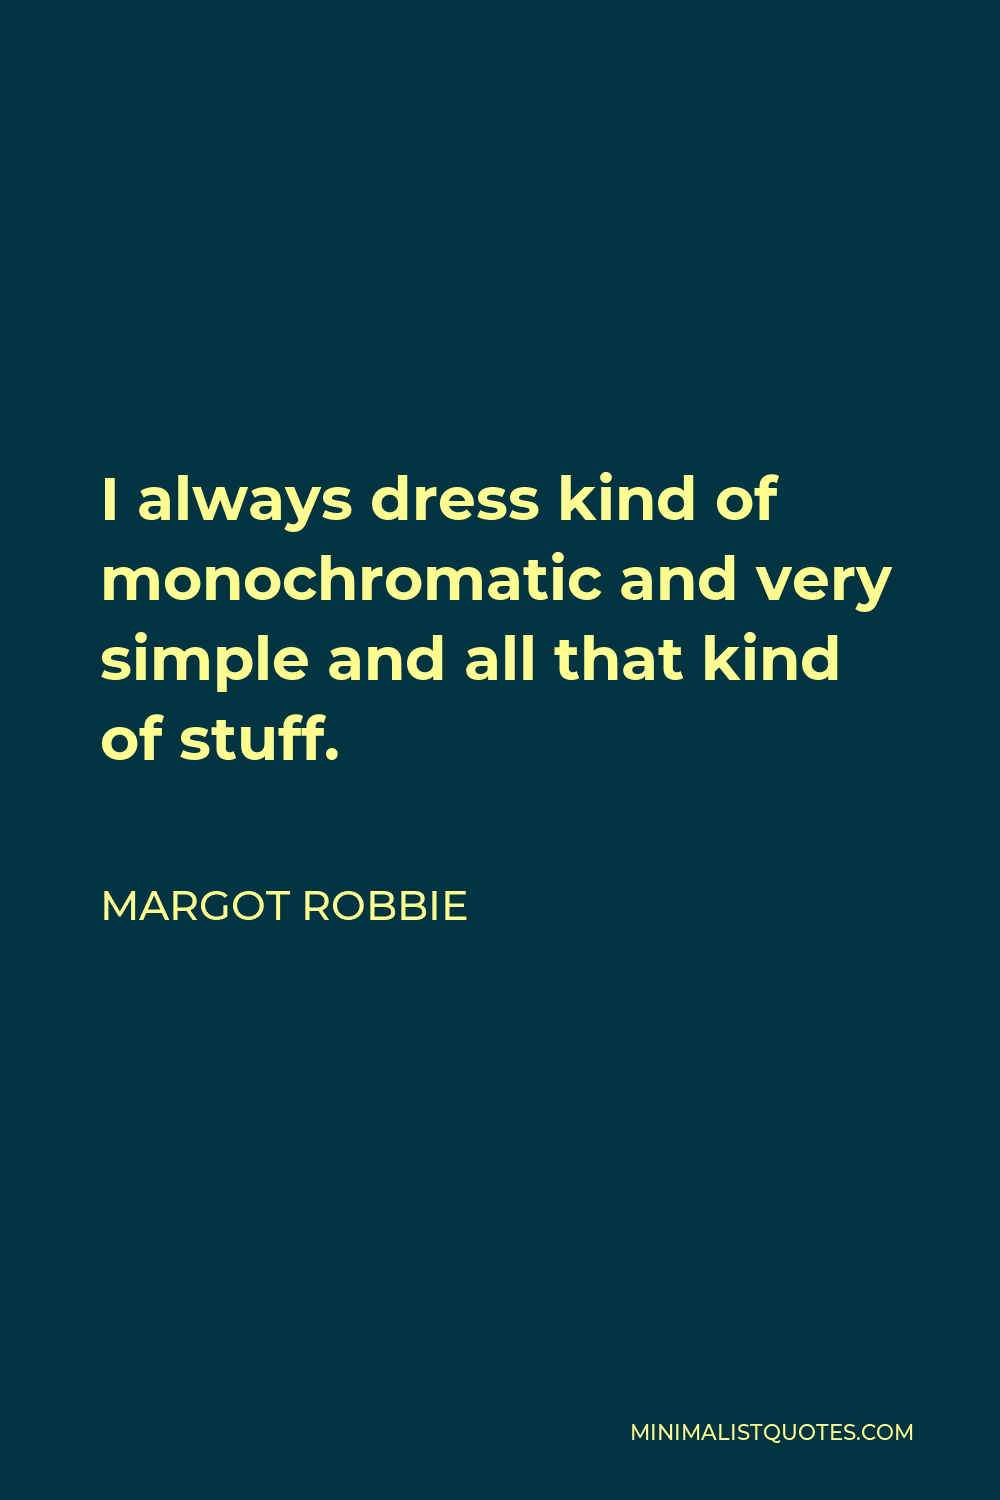 Margot Robbie Quote - I always dress kind of monochromatic and very simple and all that kind of stuff.